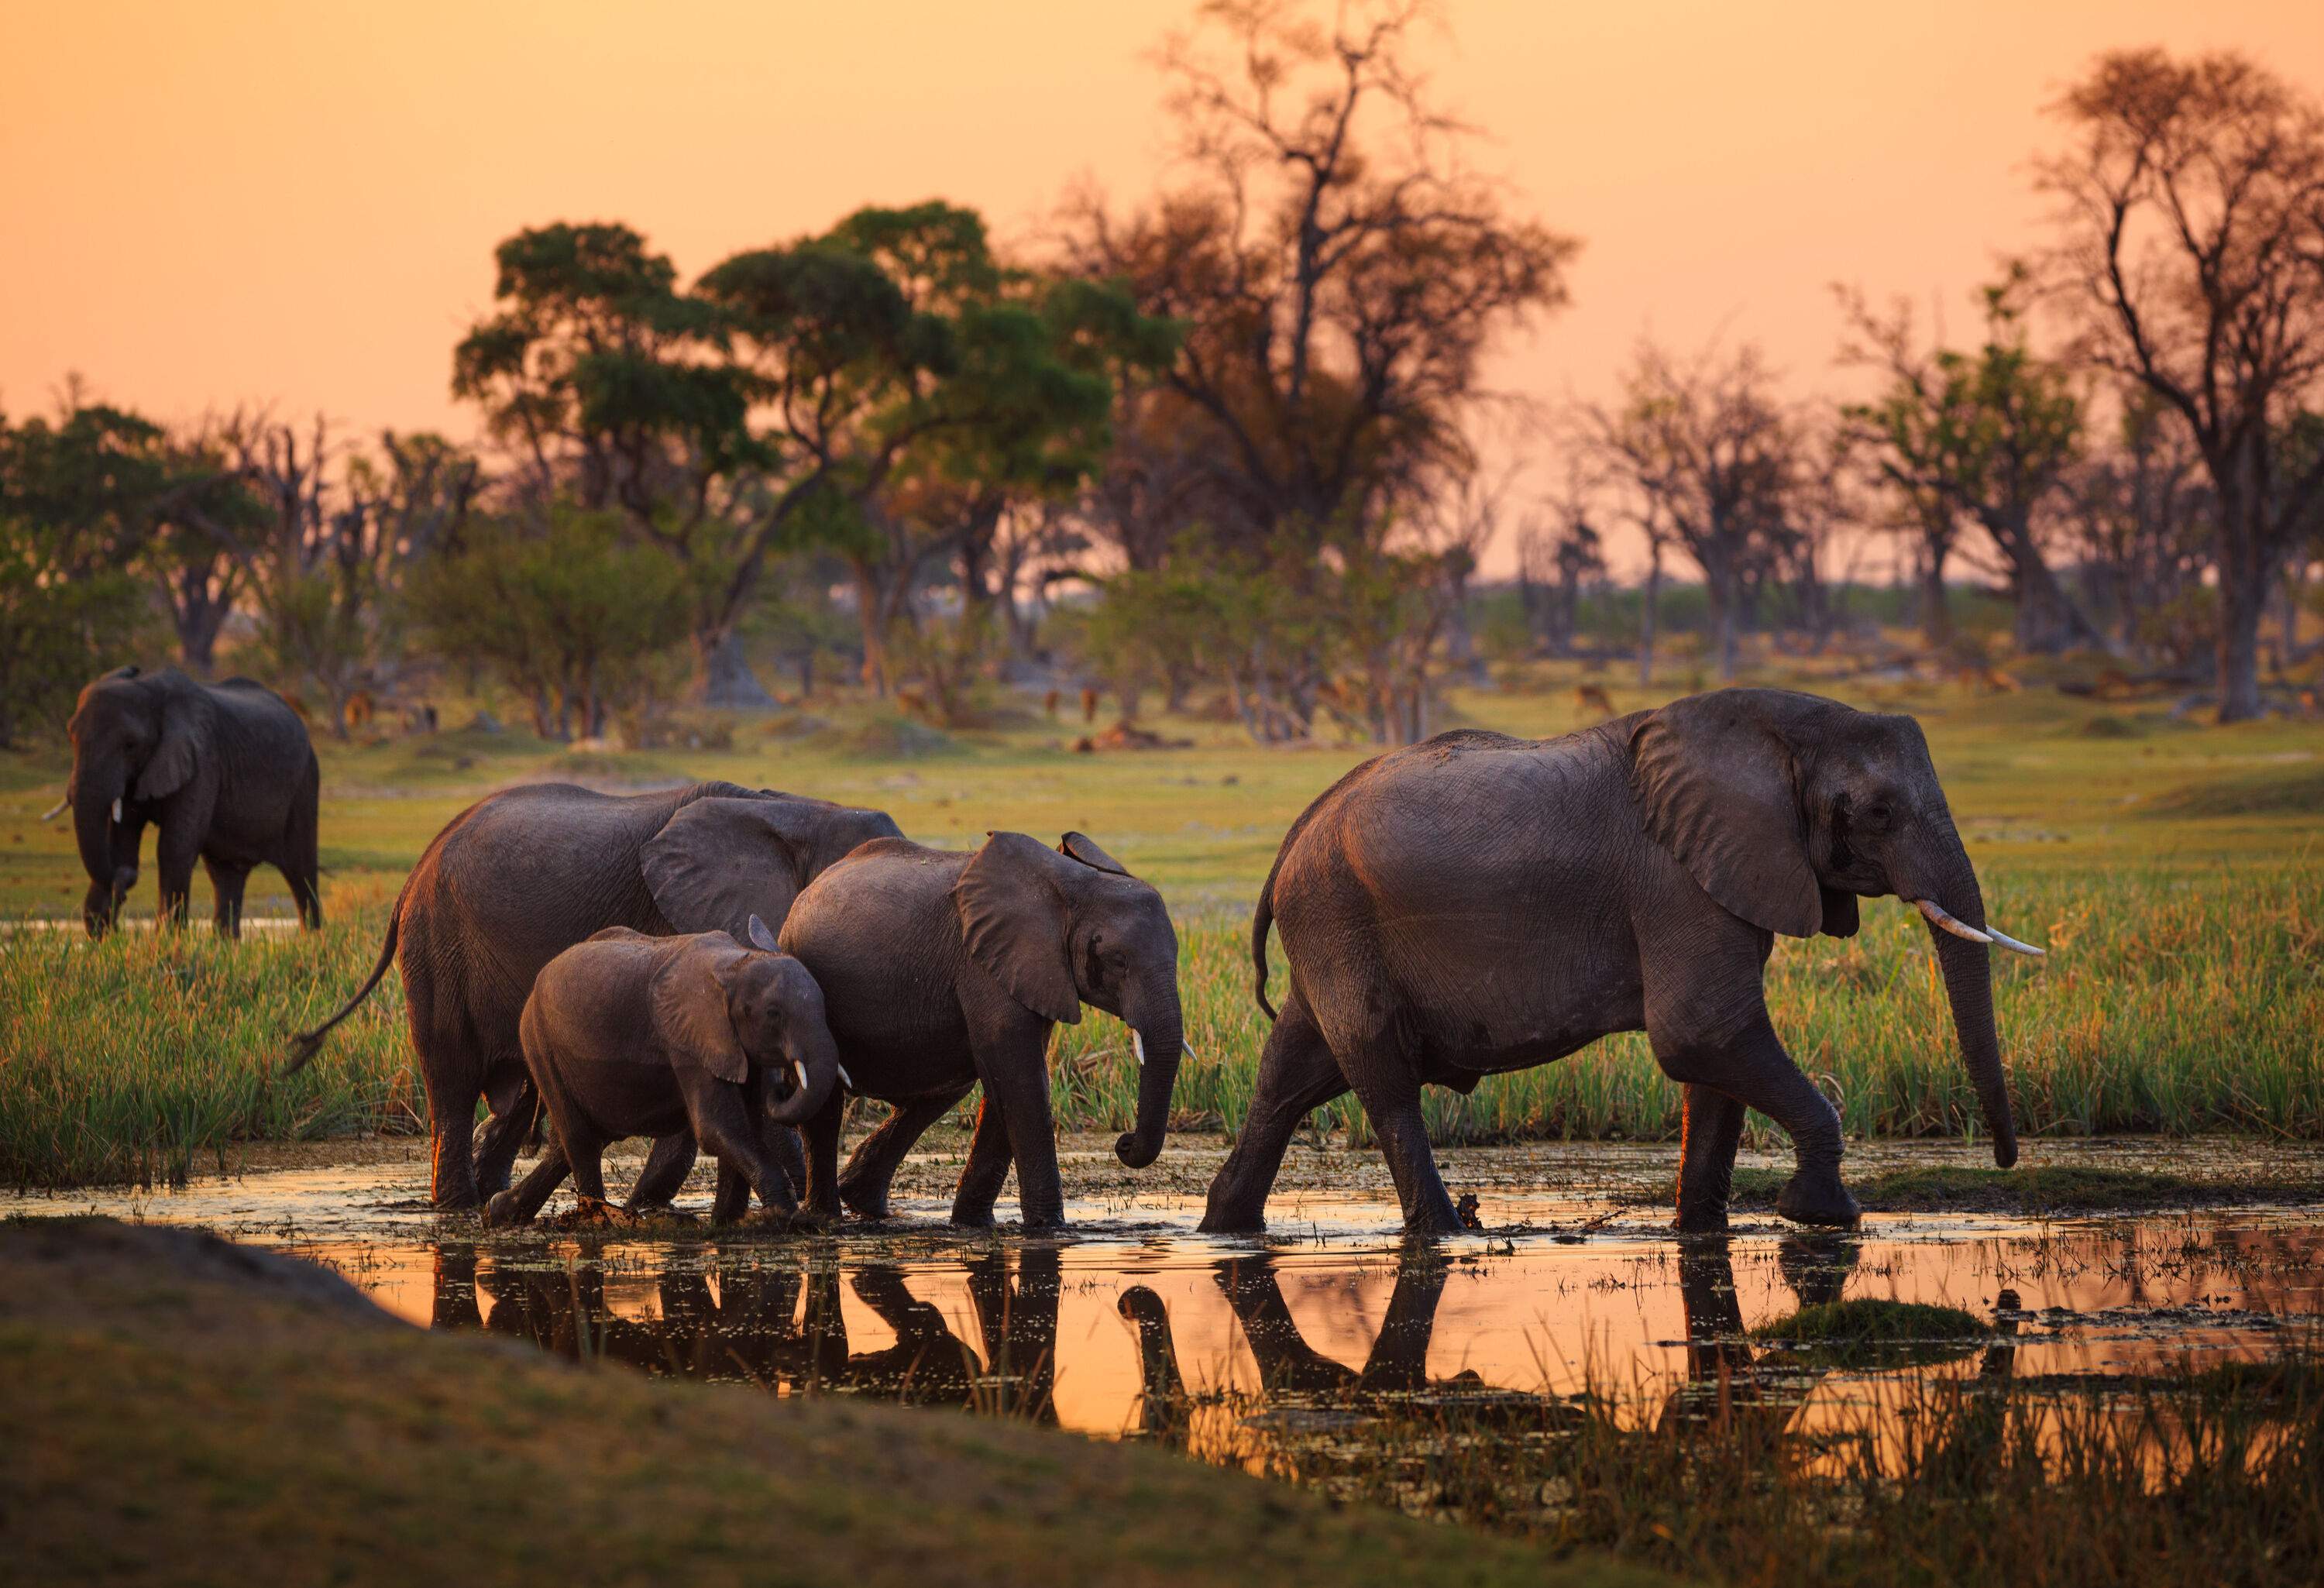 A family of elephants gracefully strolls on a wet landscape adorned with lush grass while majestic trees line the distant horizon.